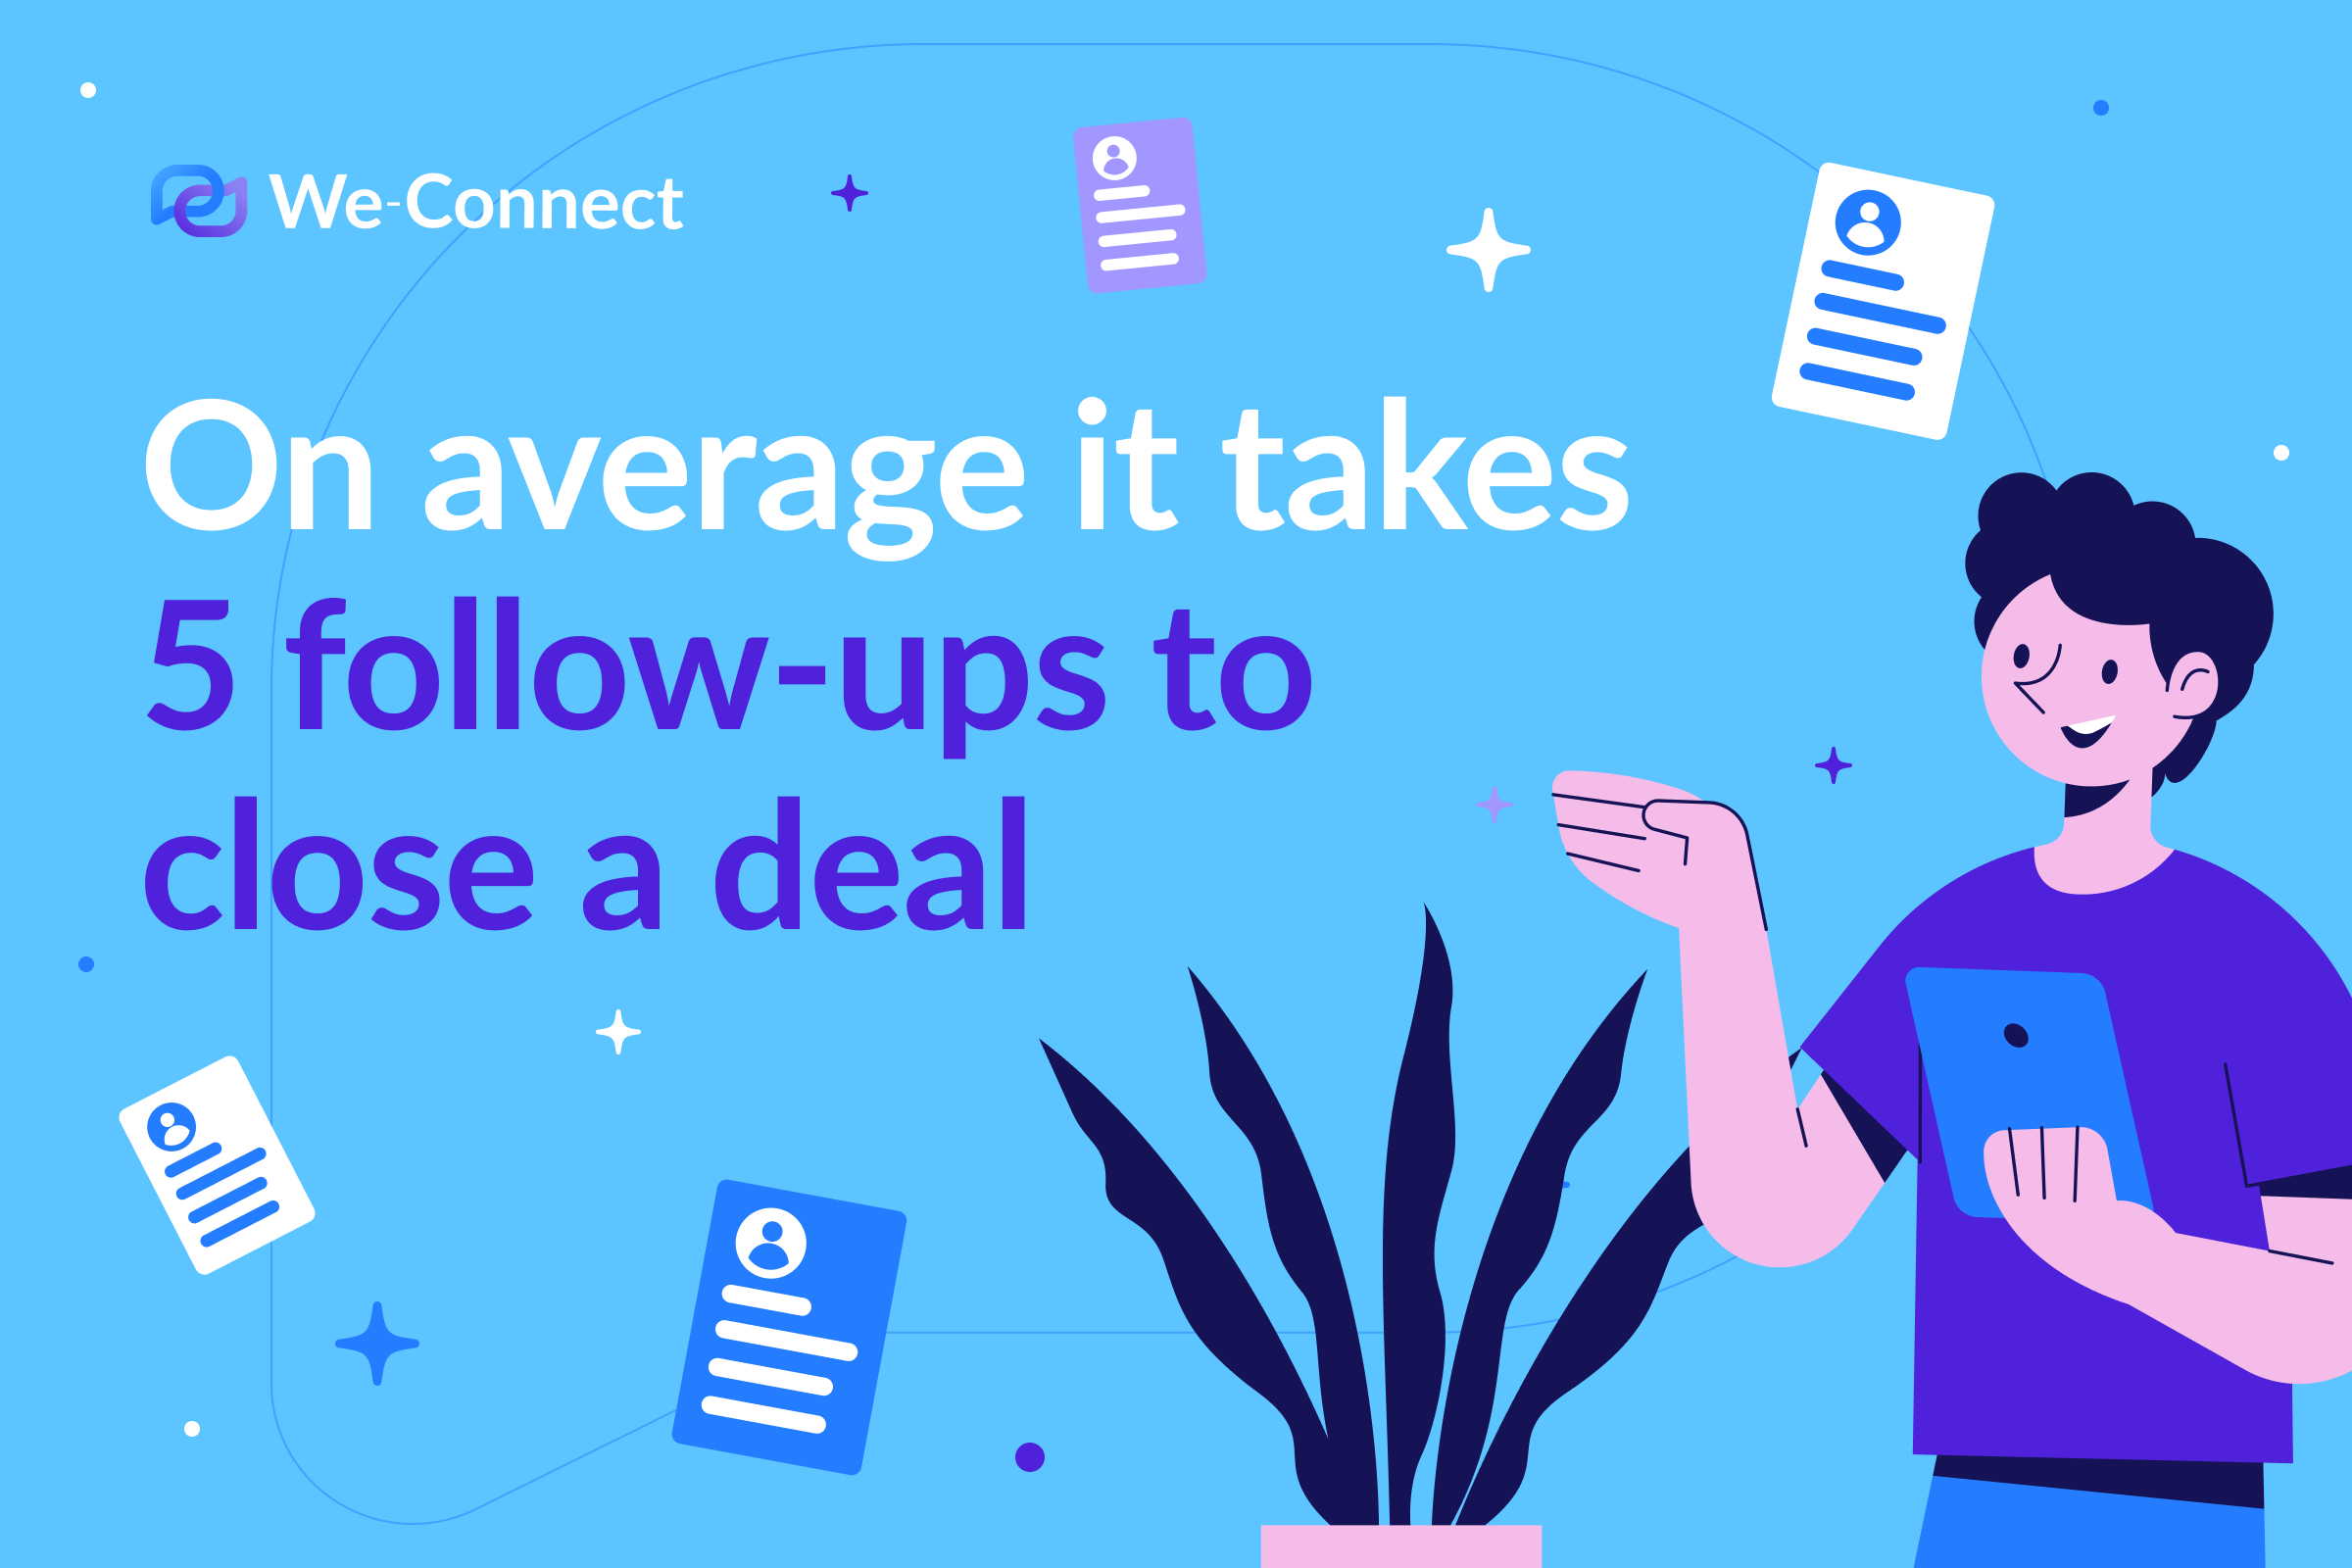 On average it takes 5 follow-ups to close a deal